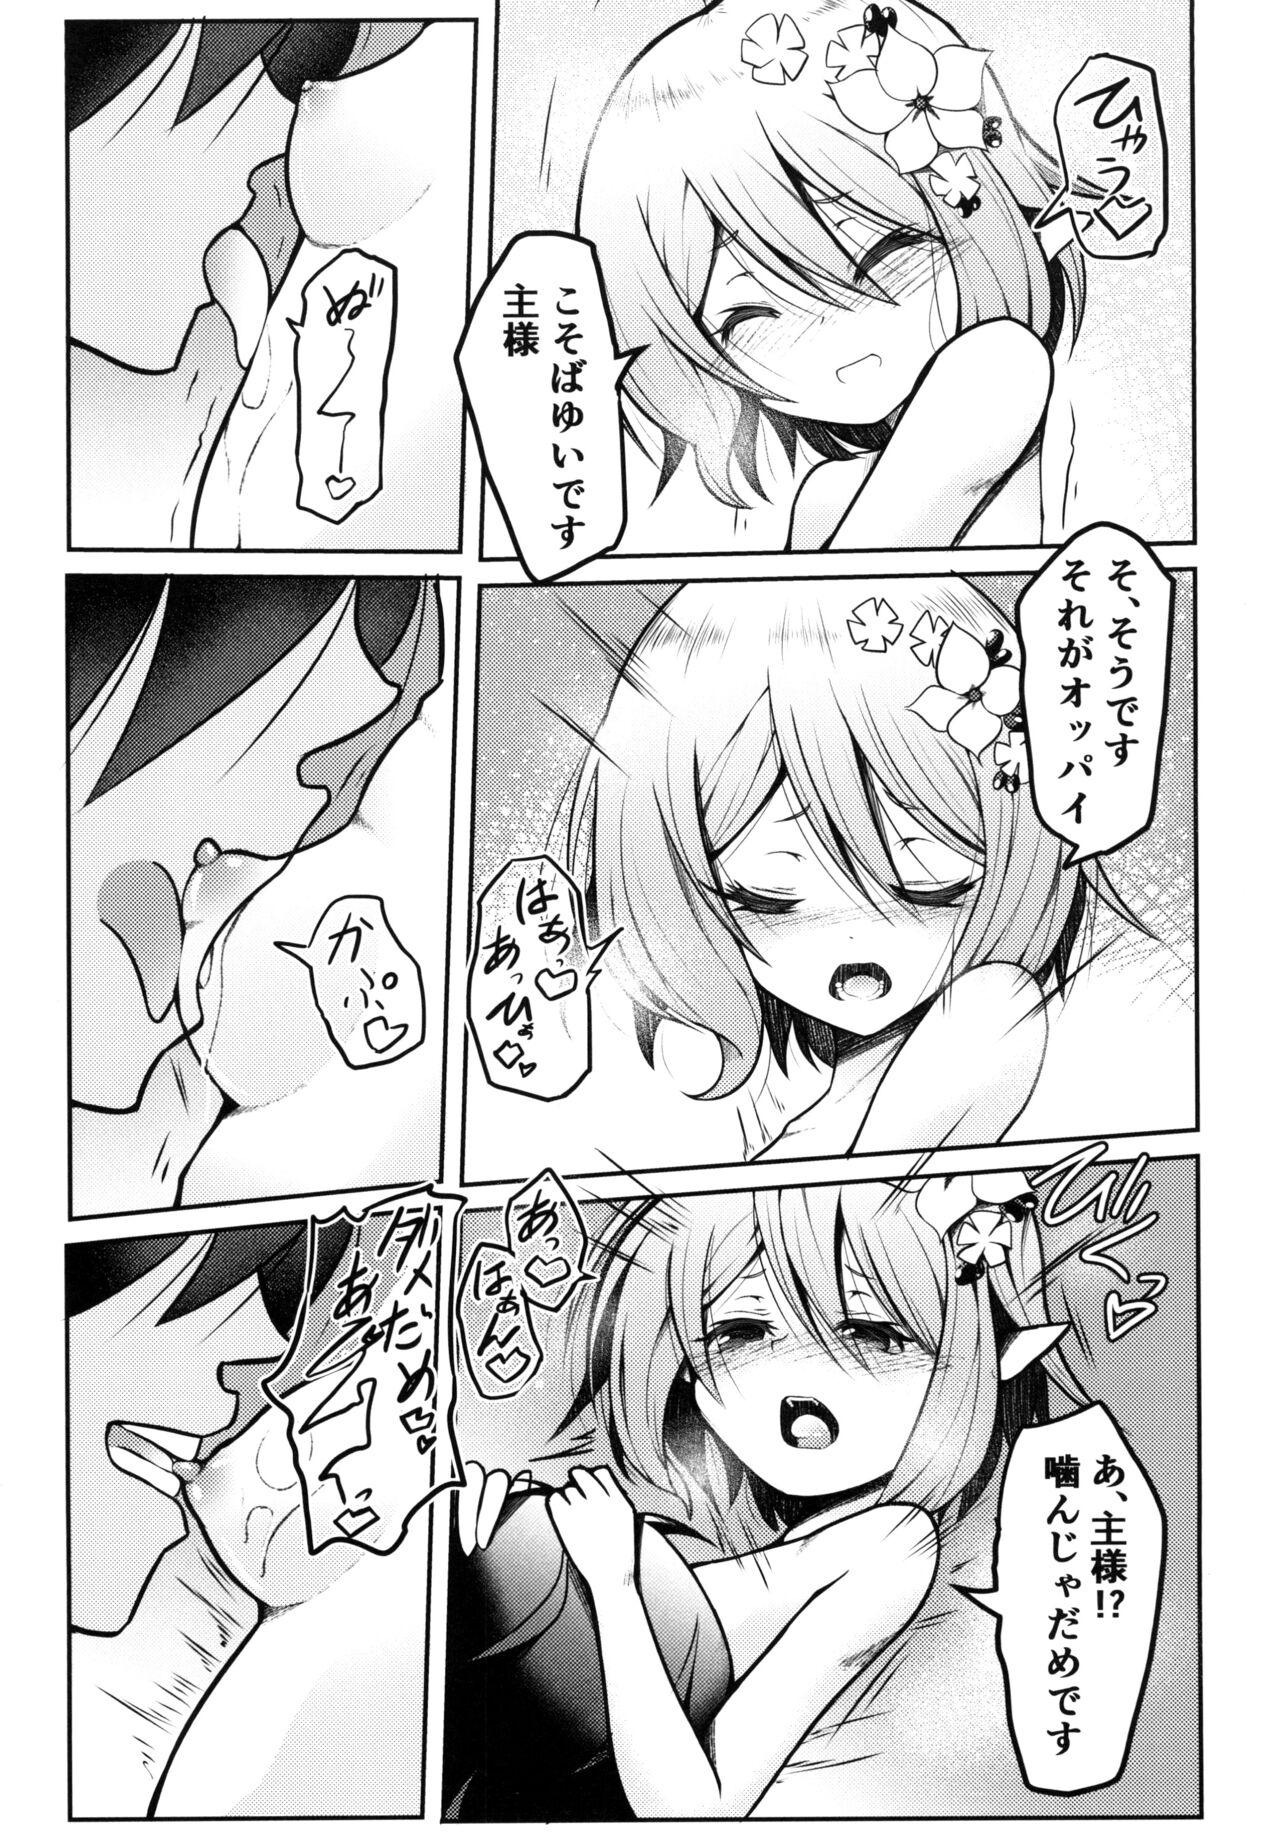 Master おべんきょしましょう主様!! - Princess connect Stripping - Page 9